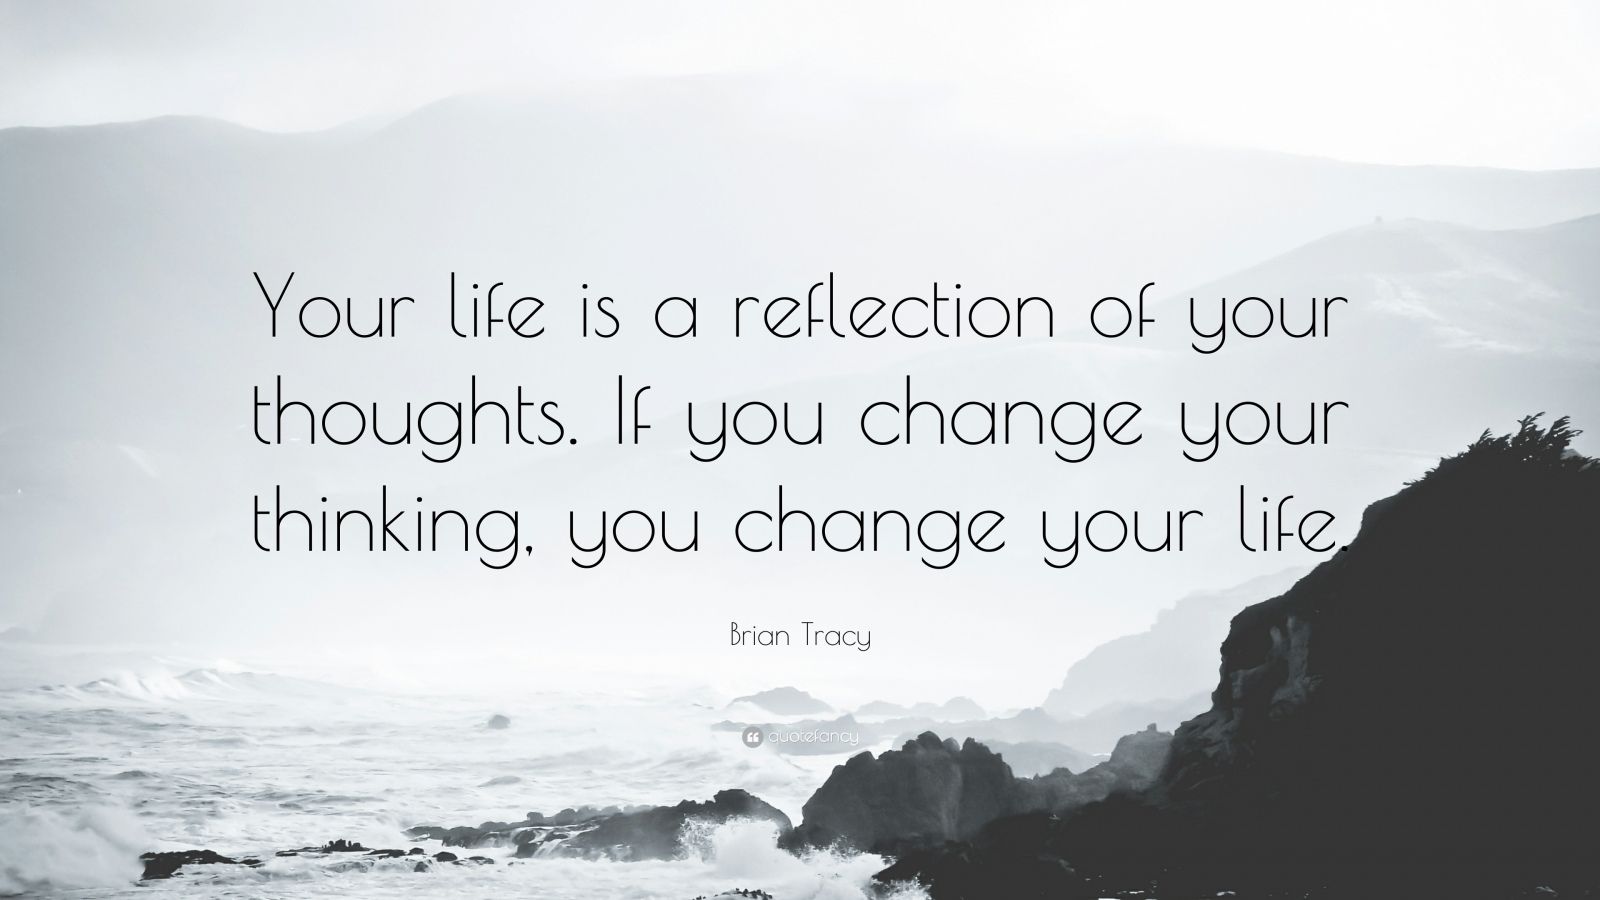 Brian Tracy Quote: “Your life is a reflection of your thoughts. If you